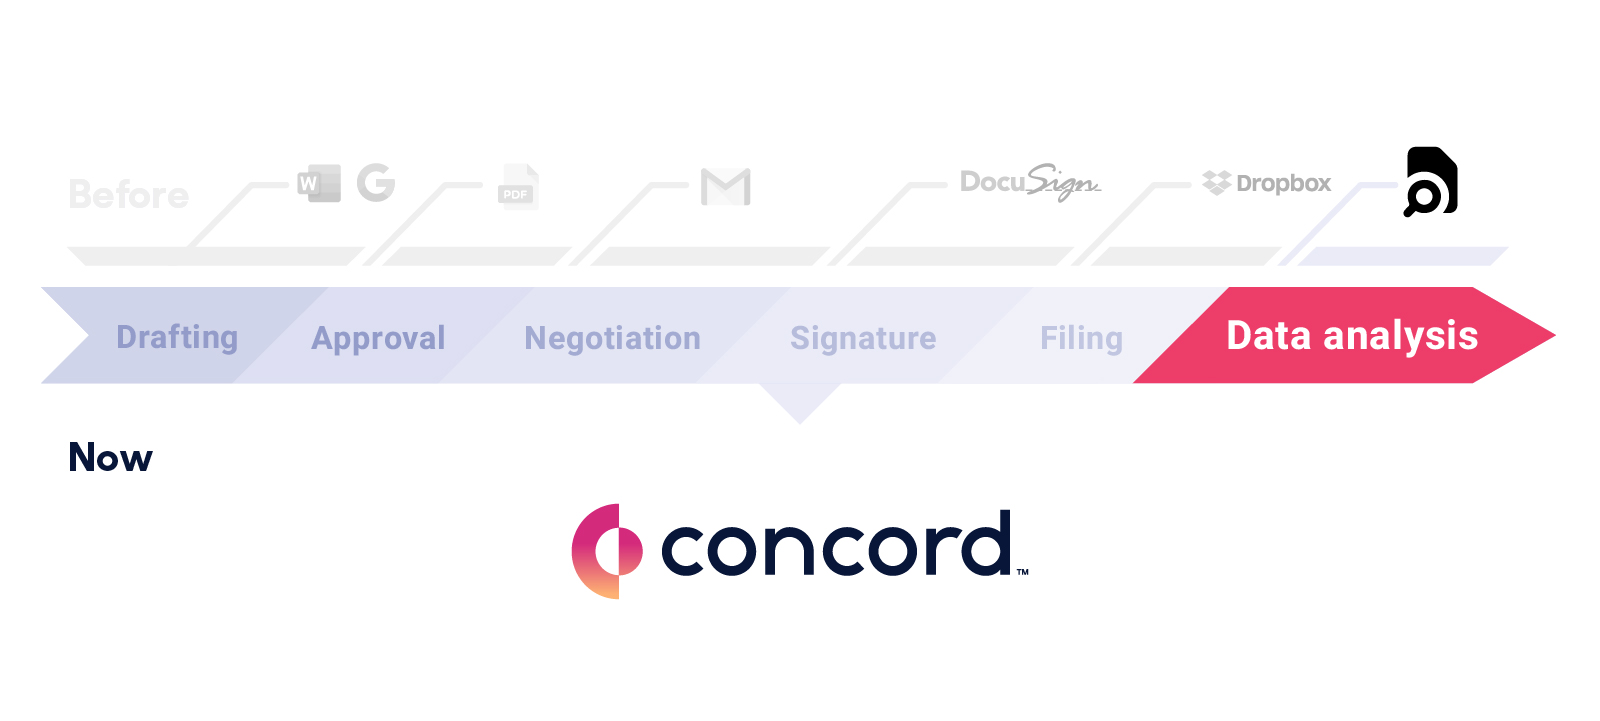 The final stage of the contract lifecycle is tracking contract renewals and analyzing document data.